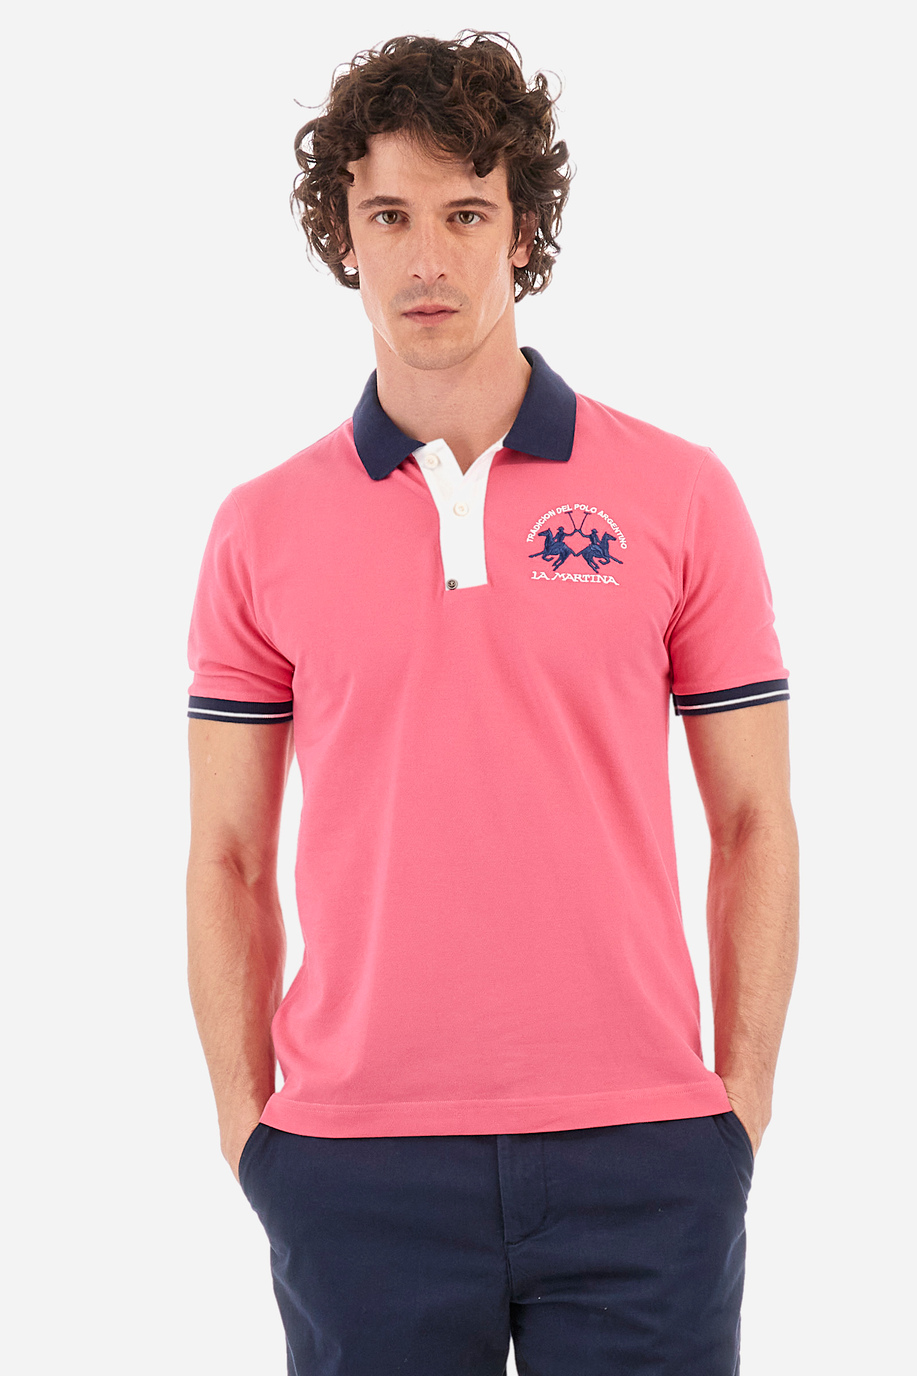 Regular-fit polo shirt in elasticated cotton - Trixie - Essential | La Martina - Official Online Shop